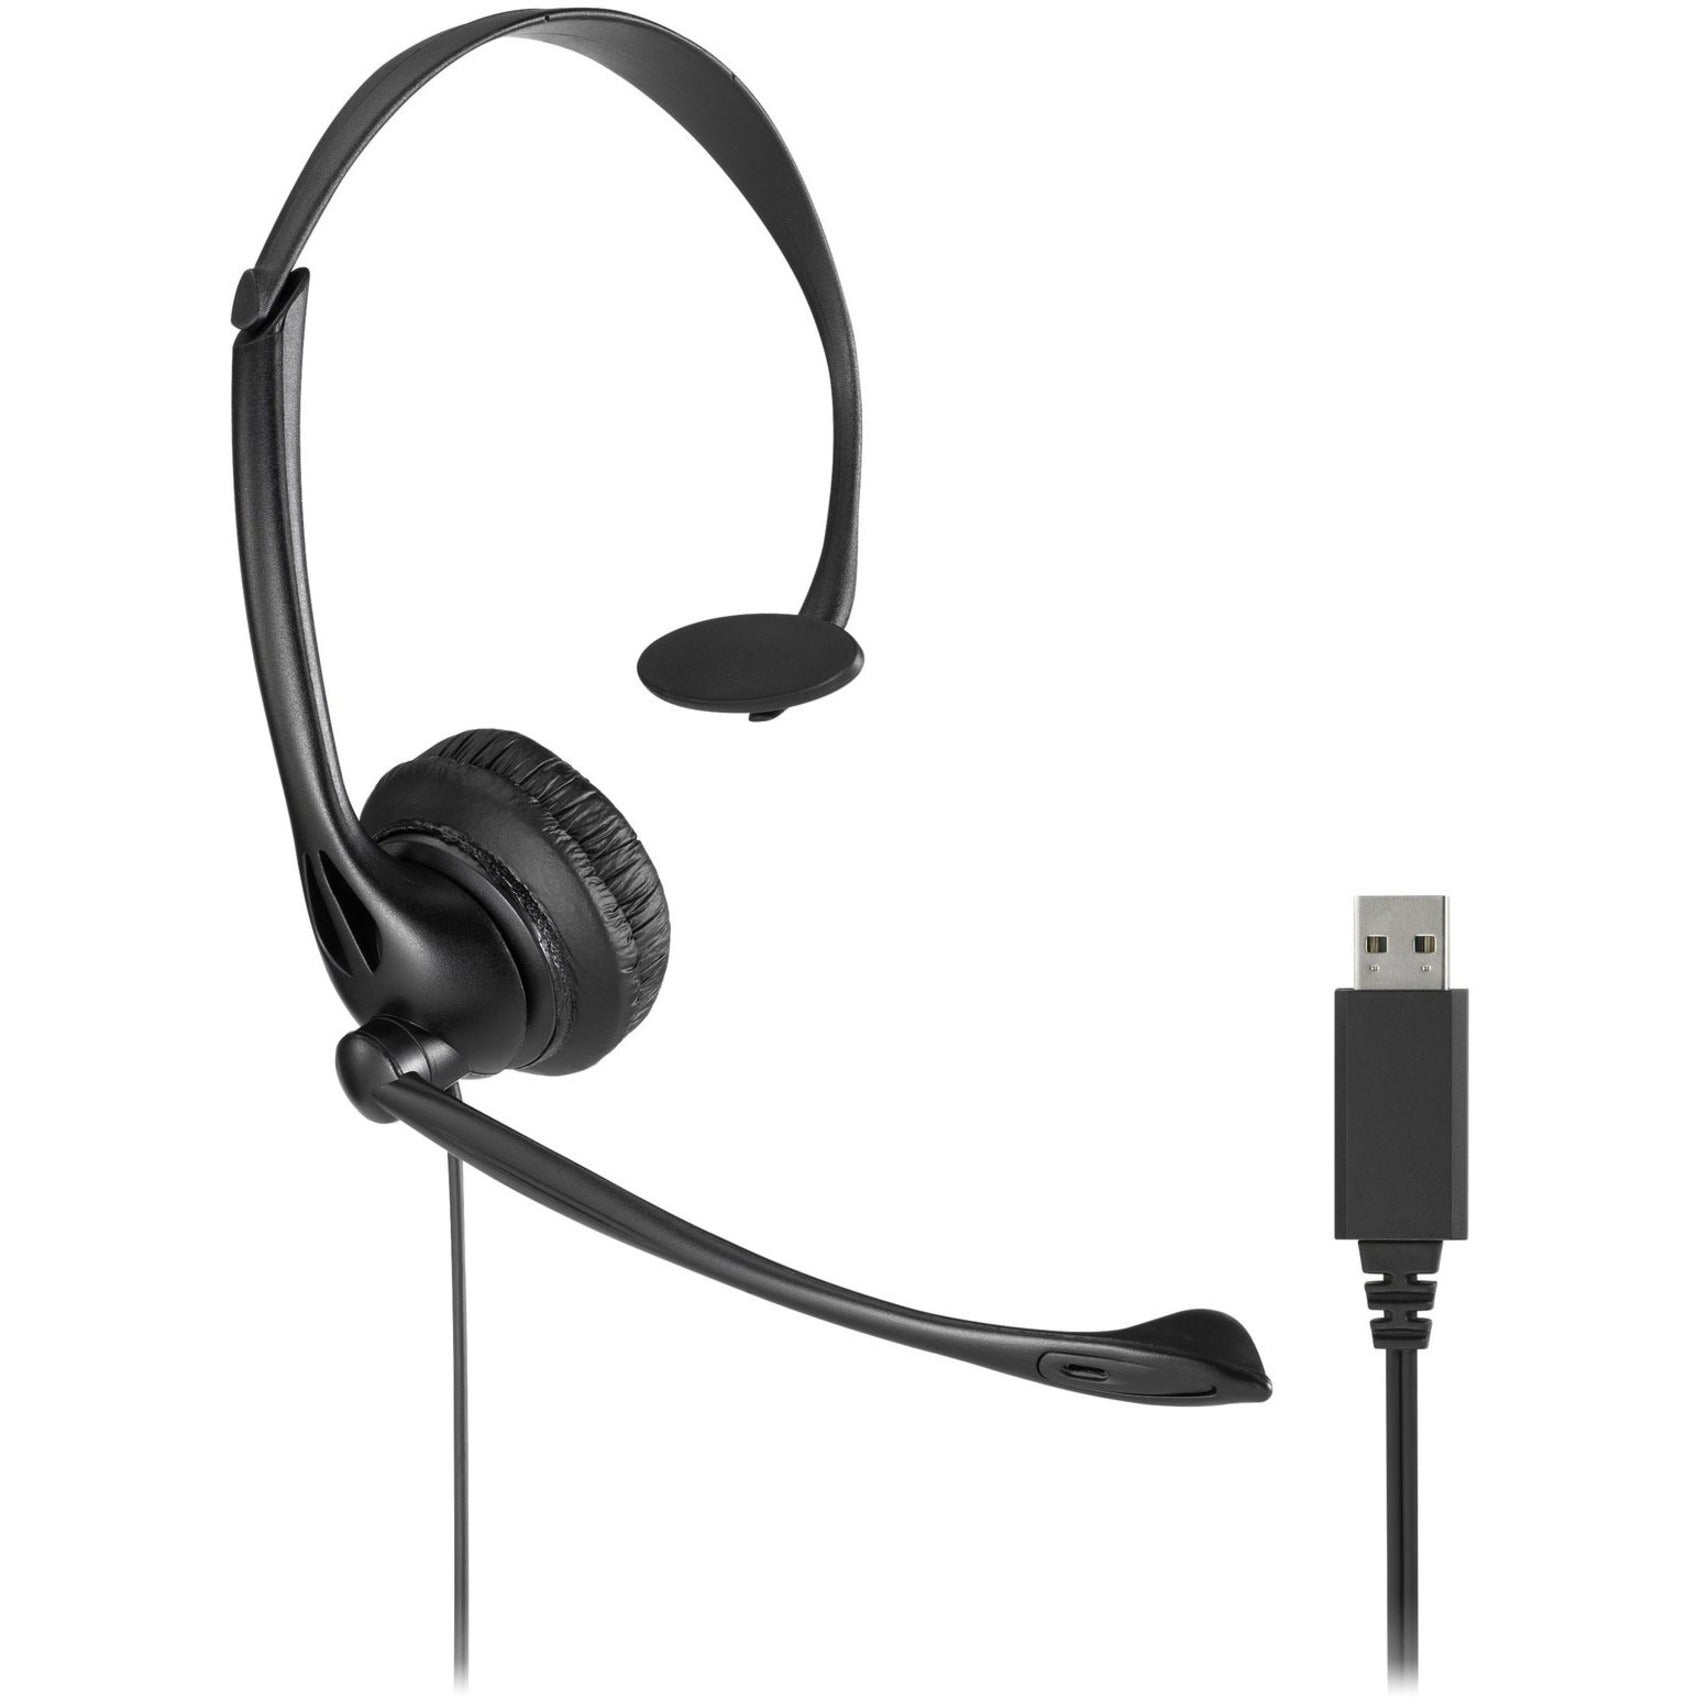 Kensington K80100WW Classic USB-A Mono Headset with Mic and Volume Control, Adjustable Headband, Plug and Play, Noise Cancelling